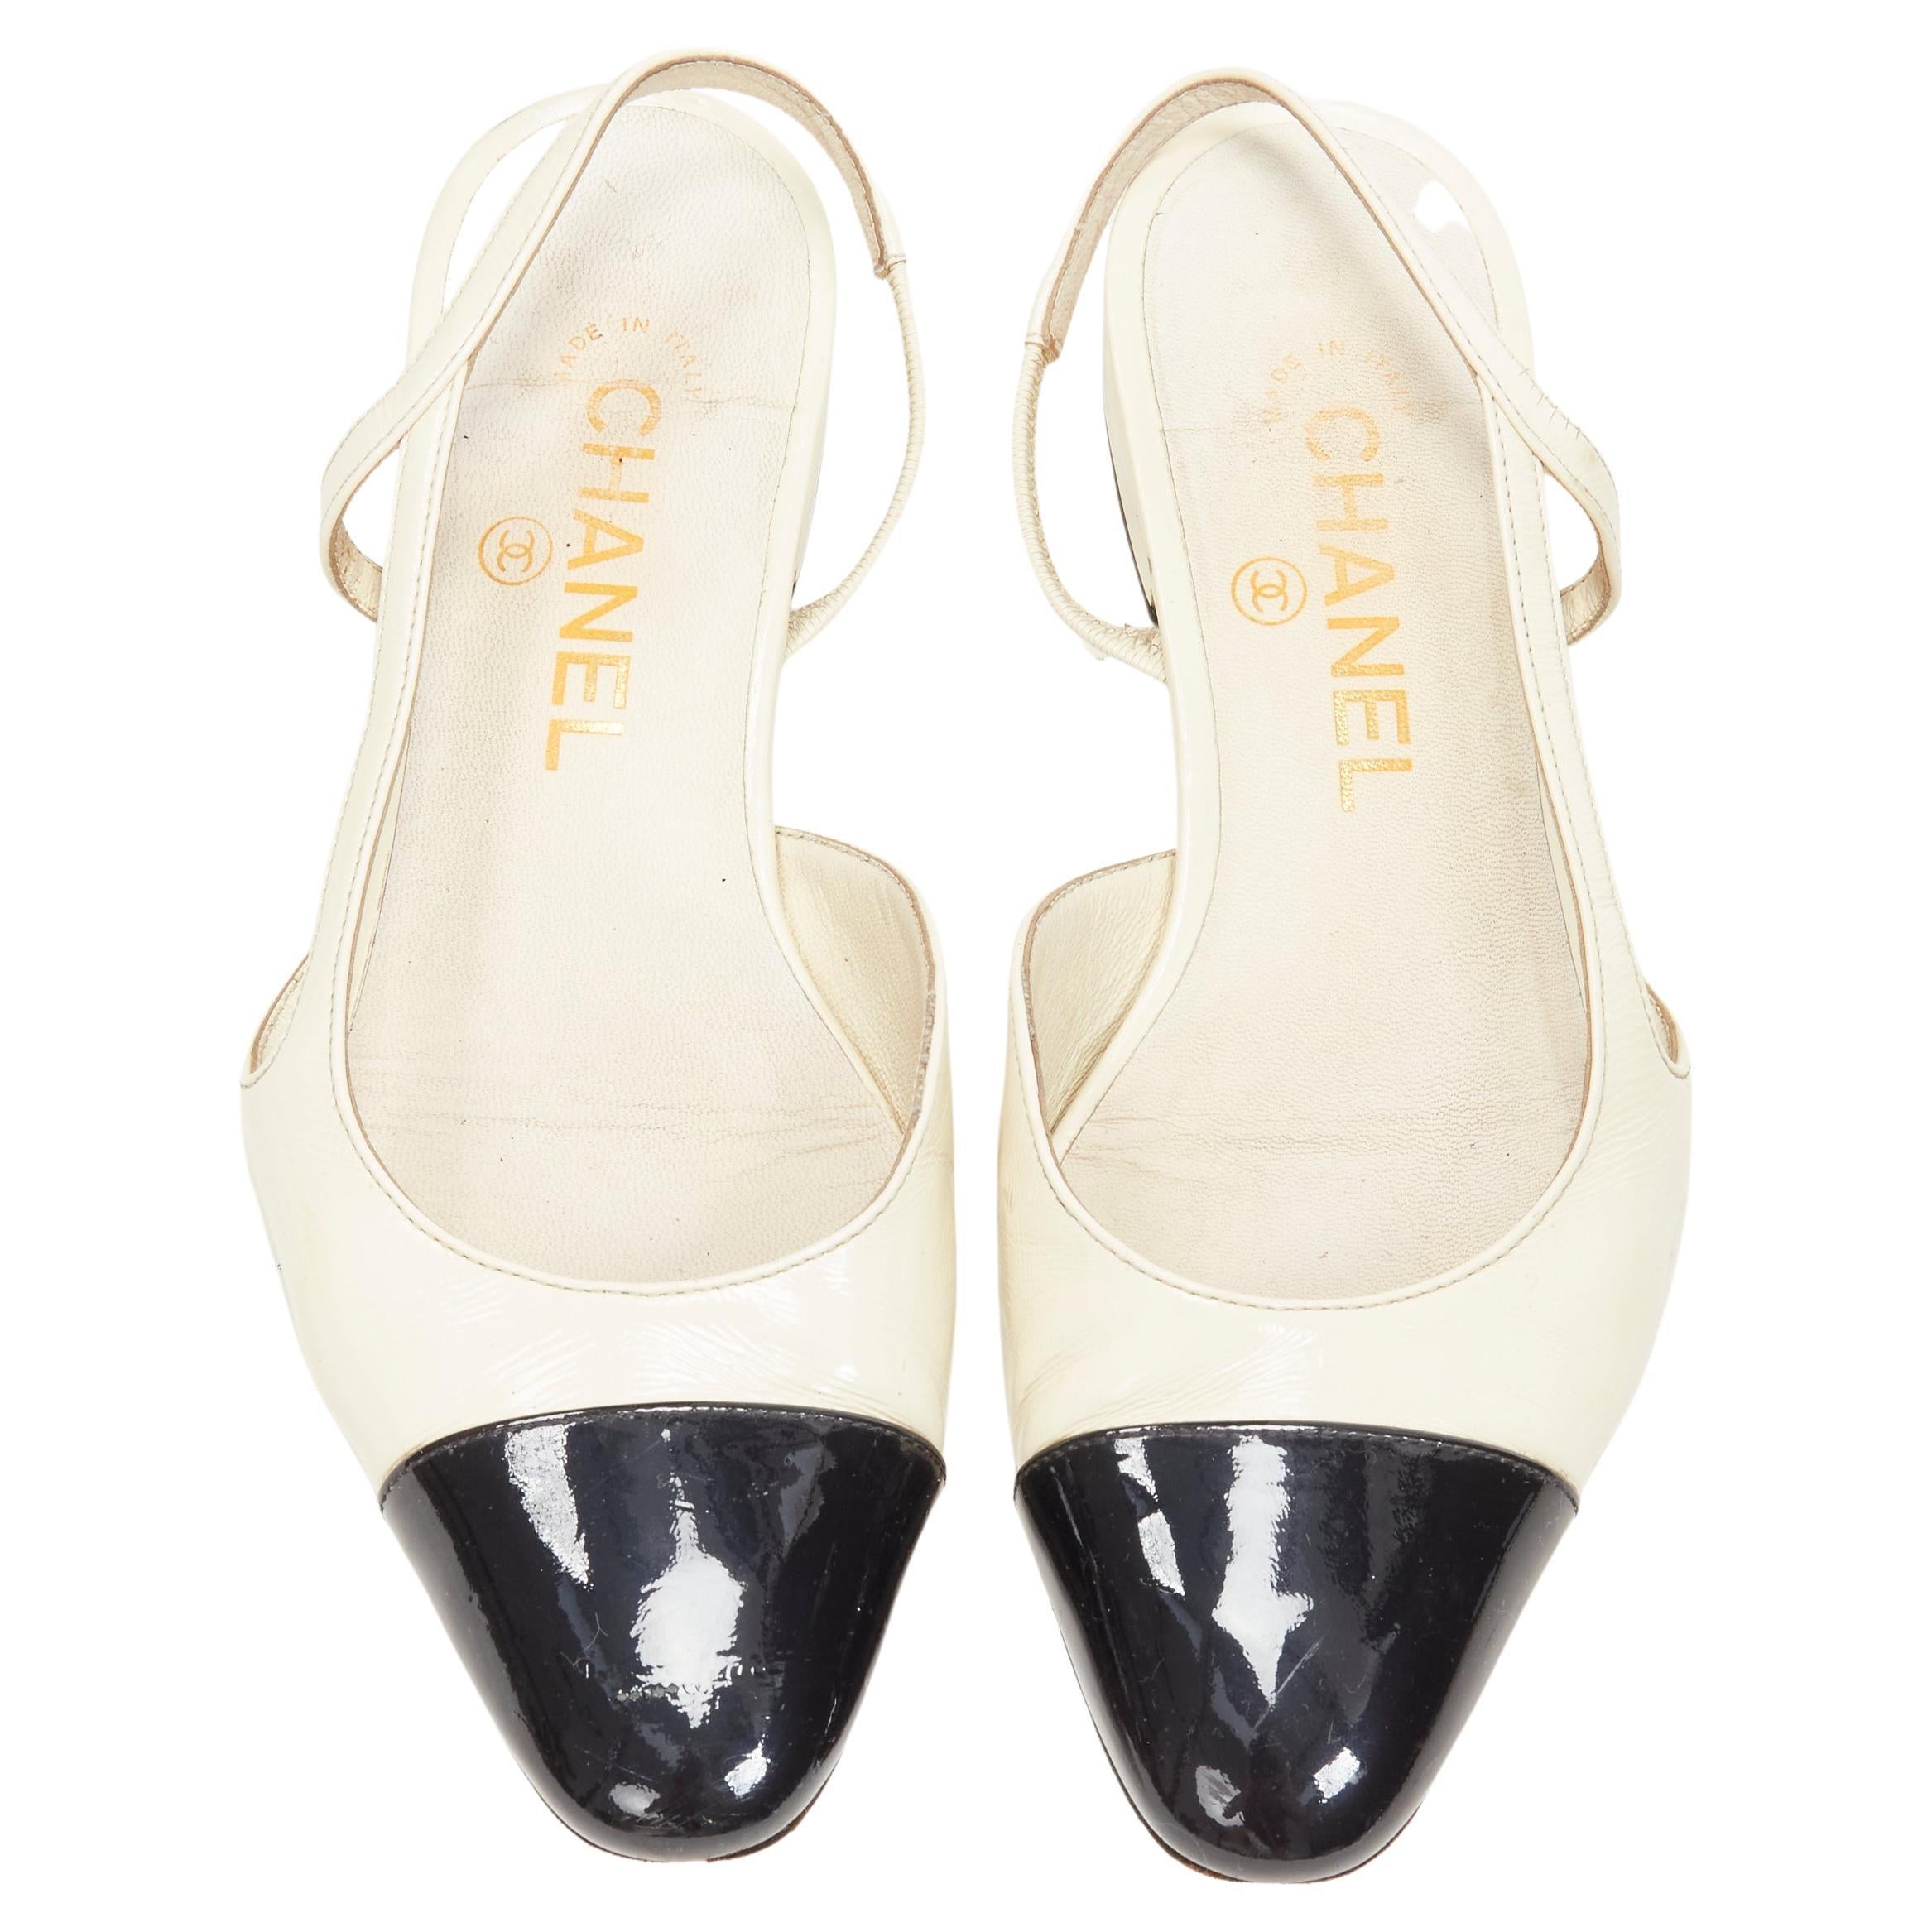 1957 - 1971, The CHANEL Two-tone Slingback